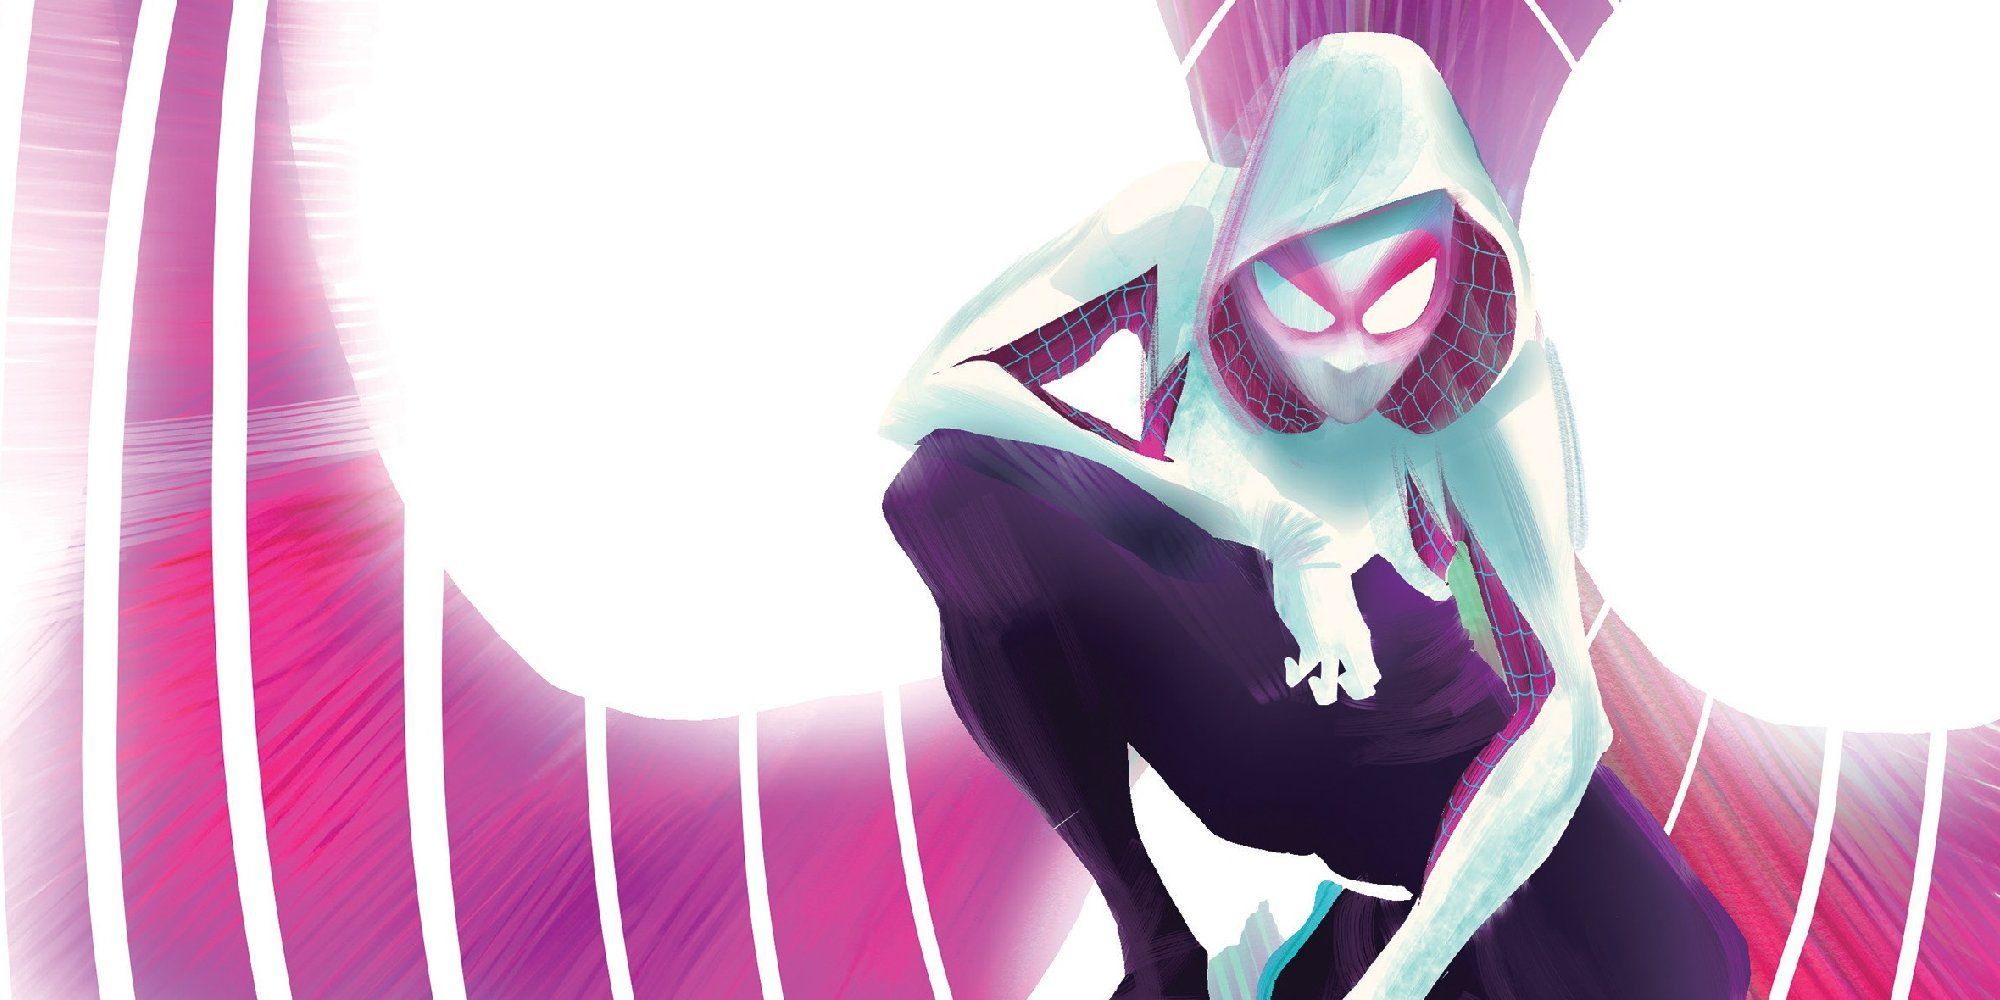 Gwen Stacy as Spider-Gwen in Marvel Comics